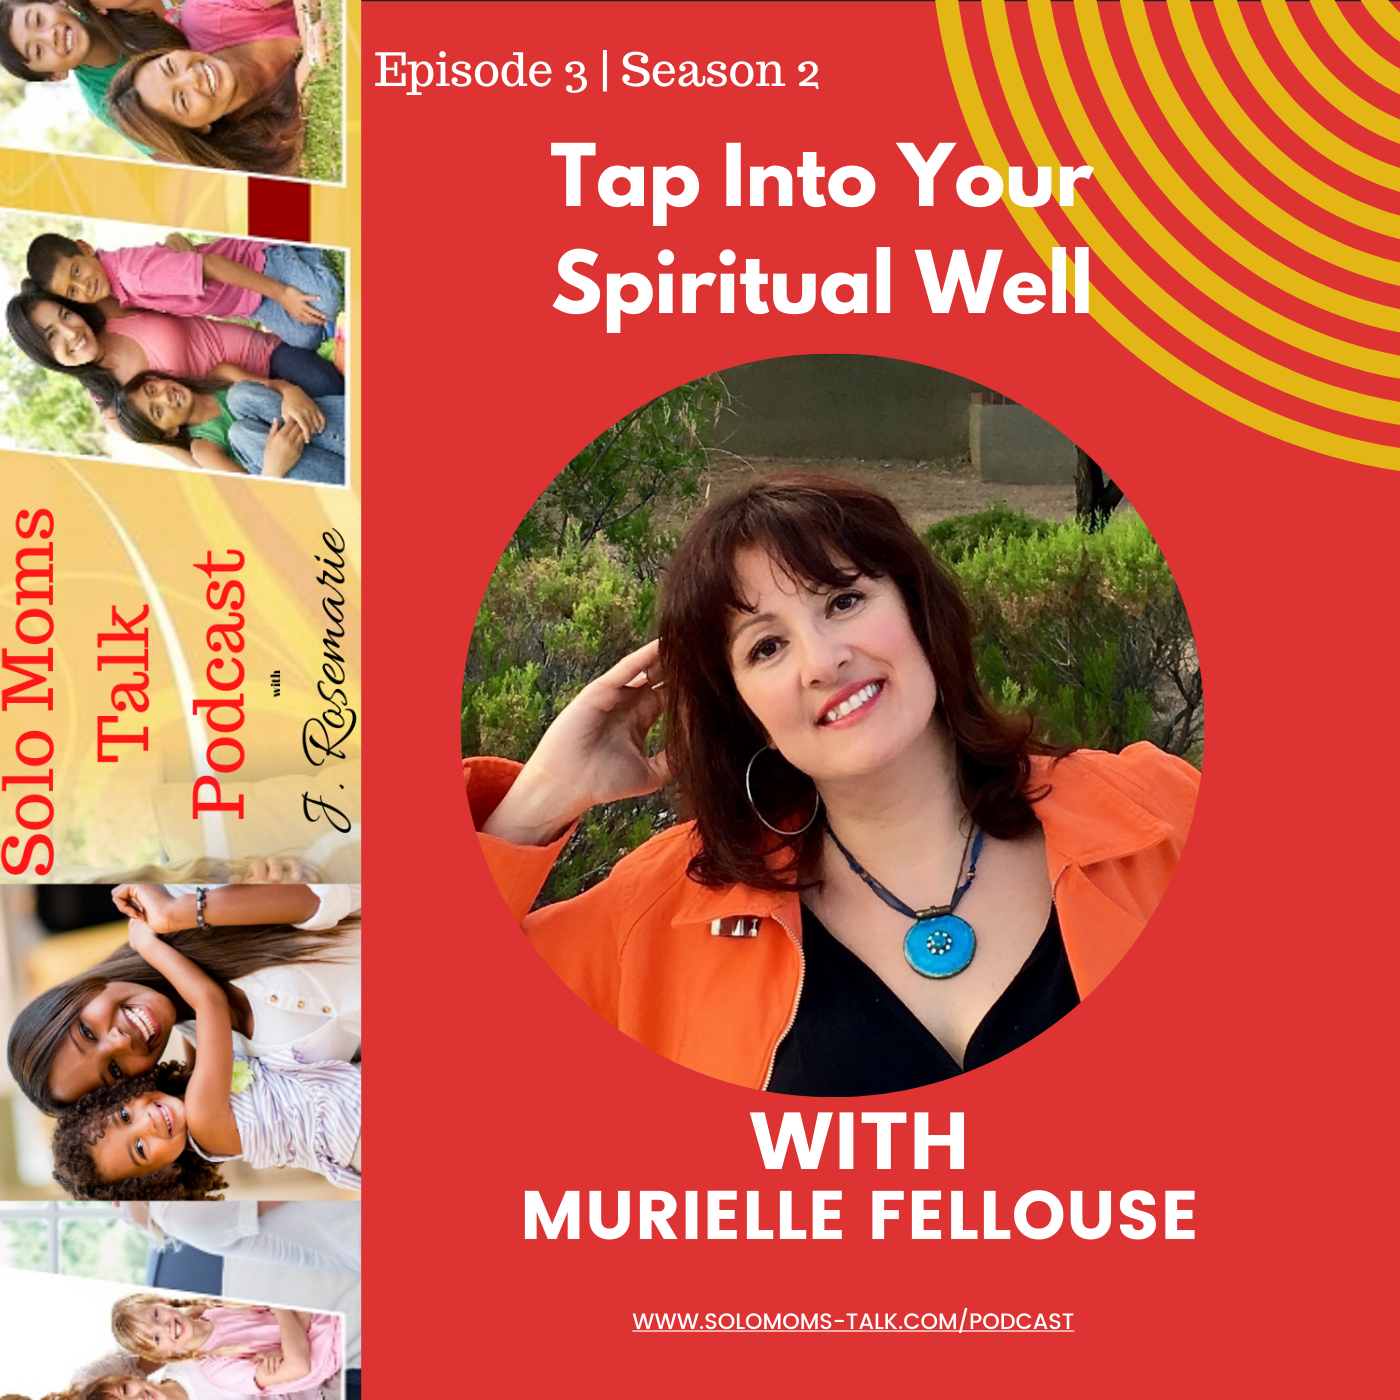 How to Tap Into Your Spiritual Well - Murielle Fellous